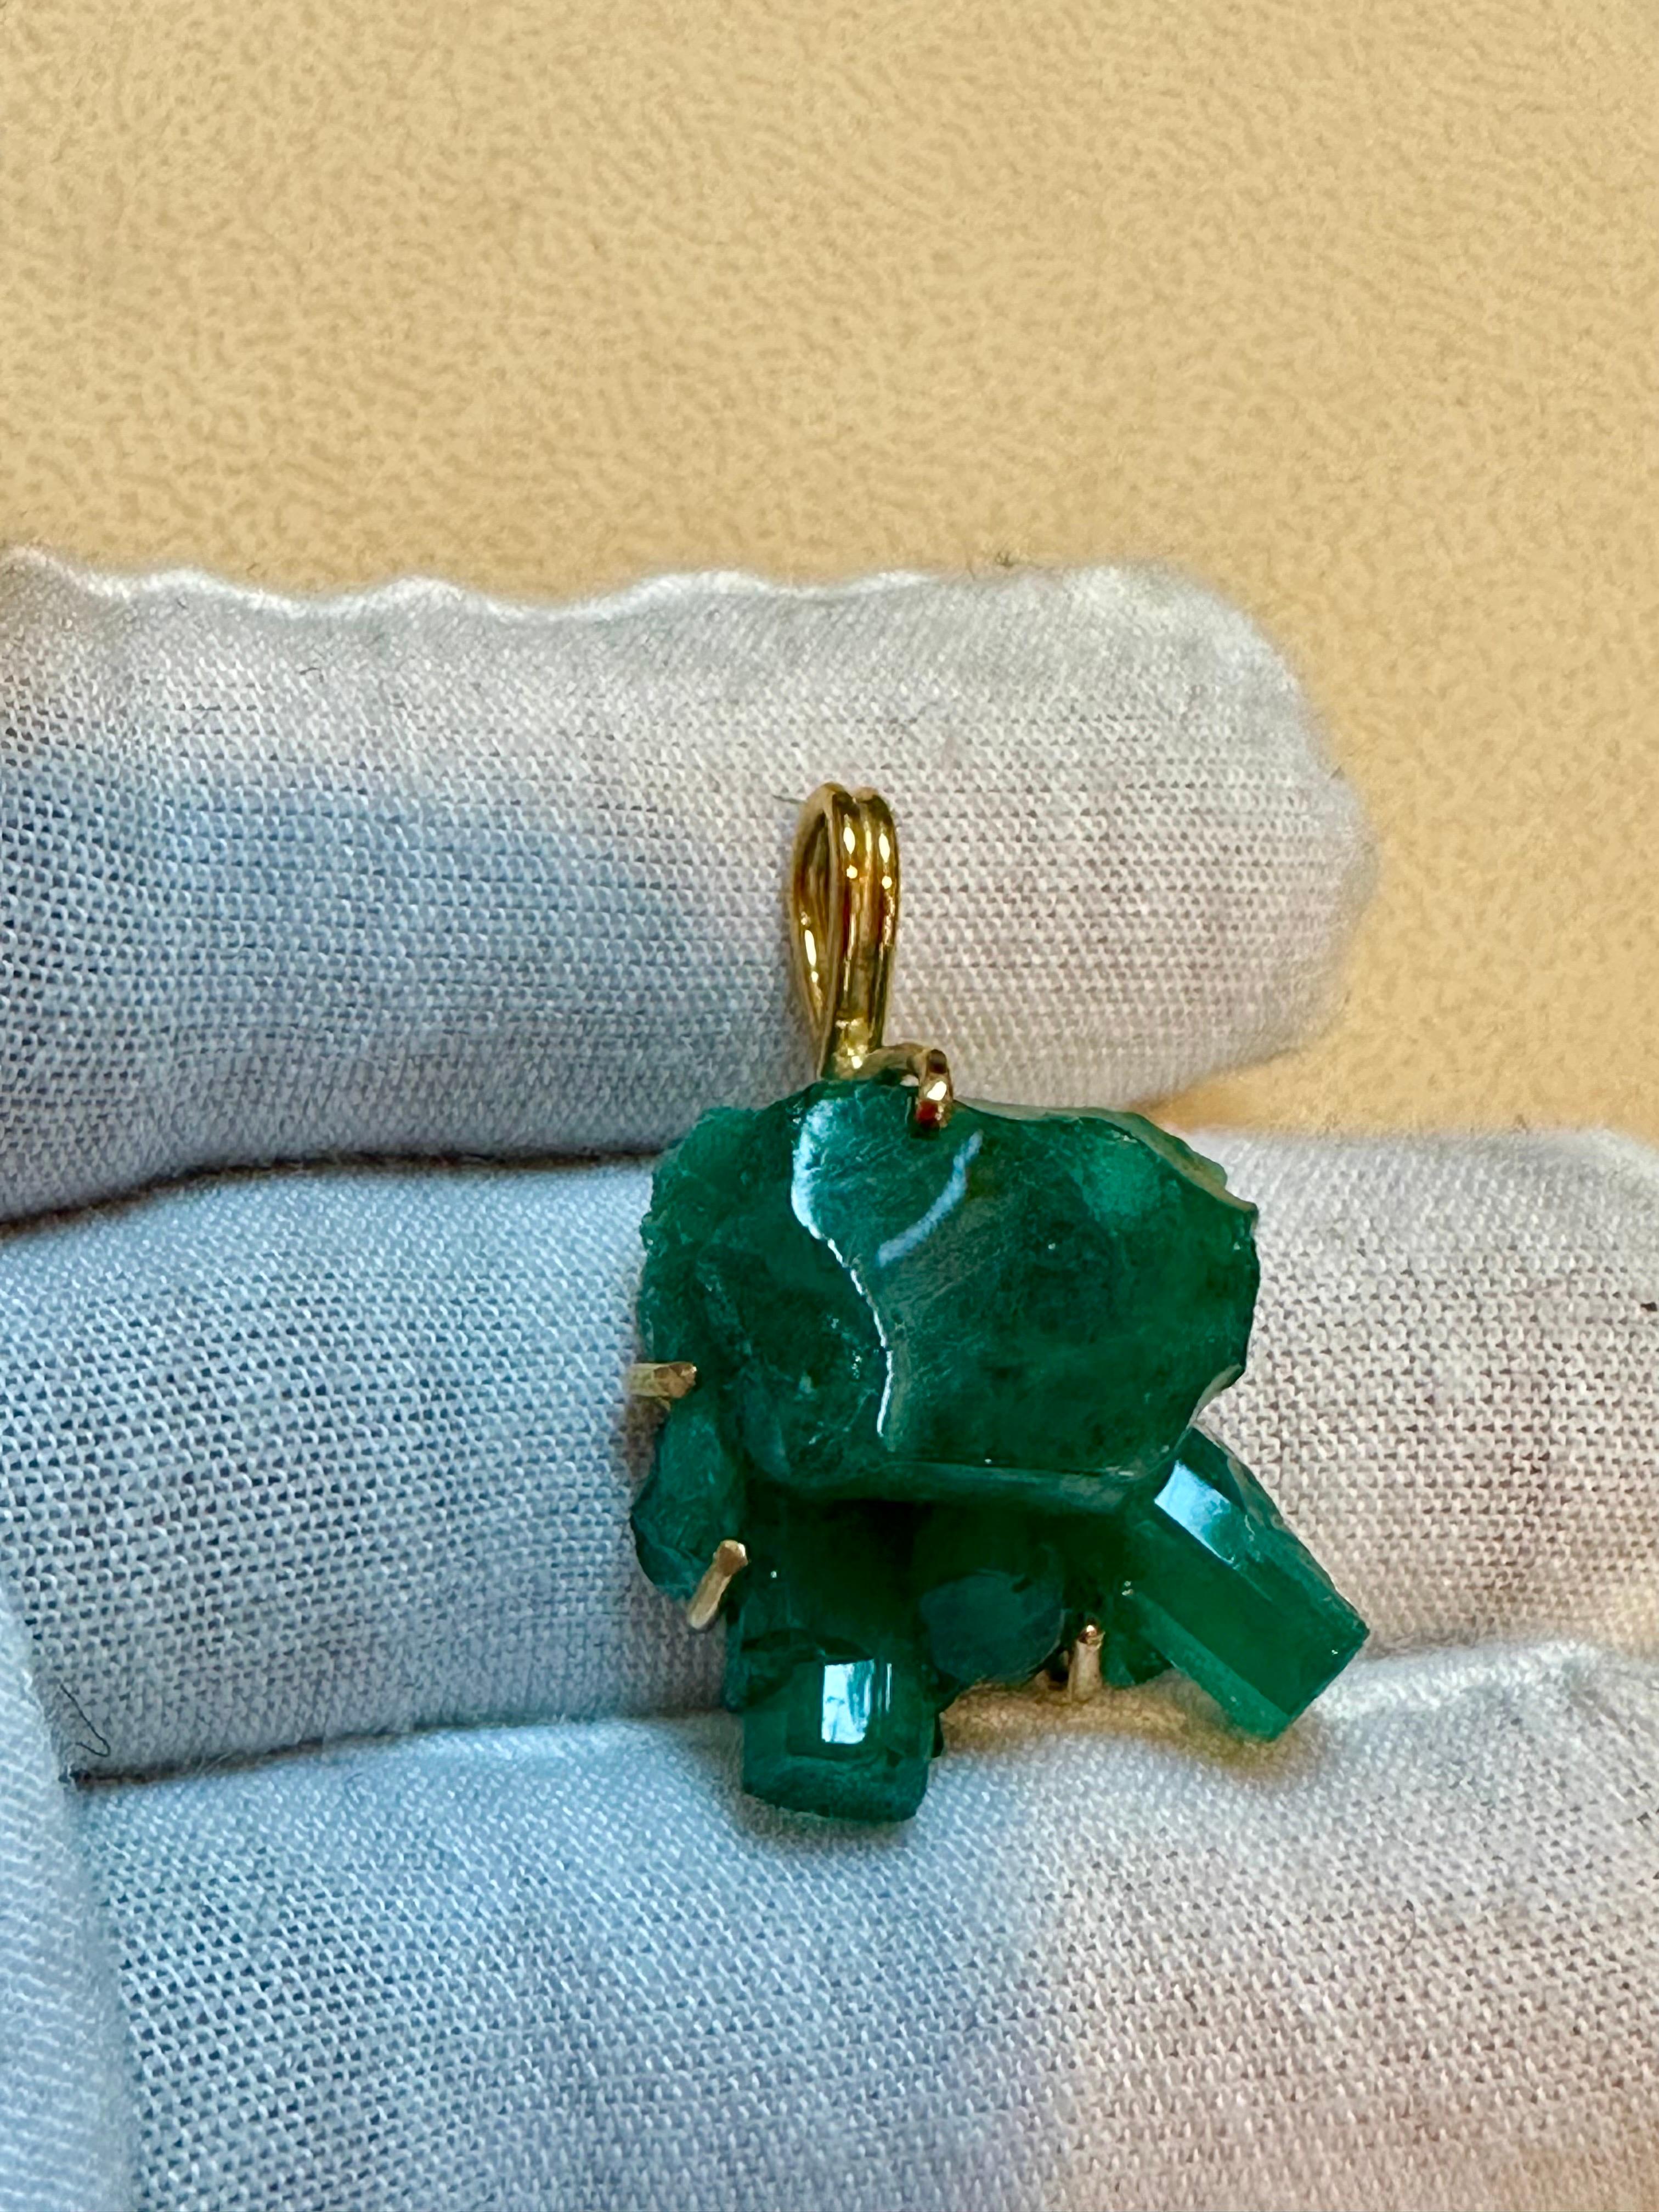 25 Carat Colombian Emerald Rough Pendent/Necklace 18 Karat Gold with 18 KG Chain For Sale 1